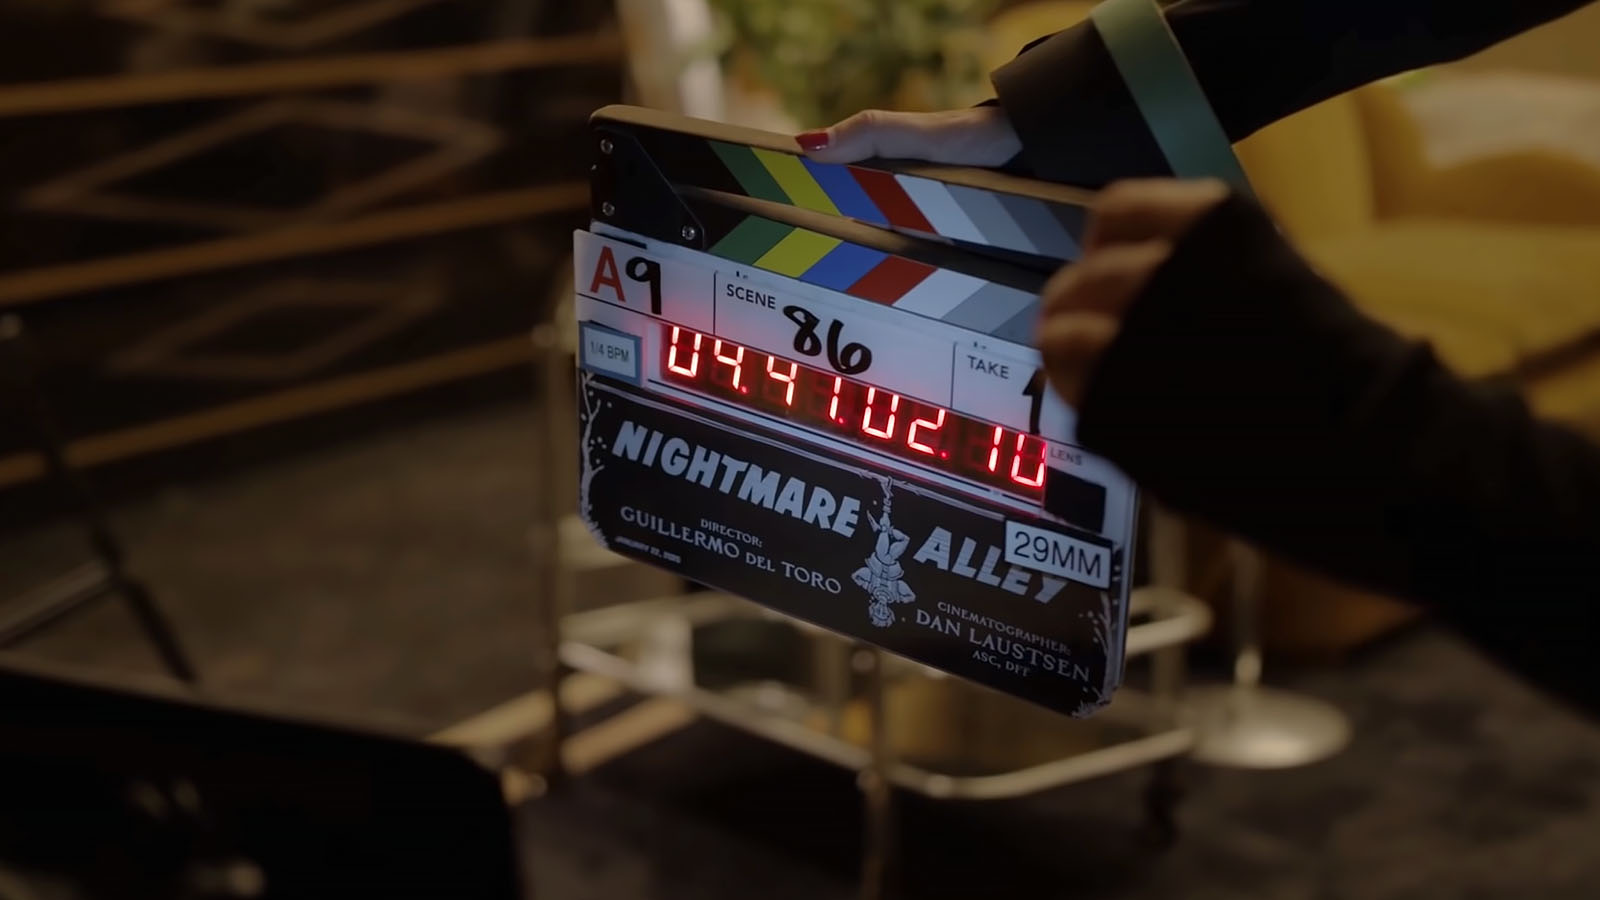 Slating scene 86 of Nightmare Alley. Image © Searchlight Pictures